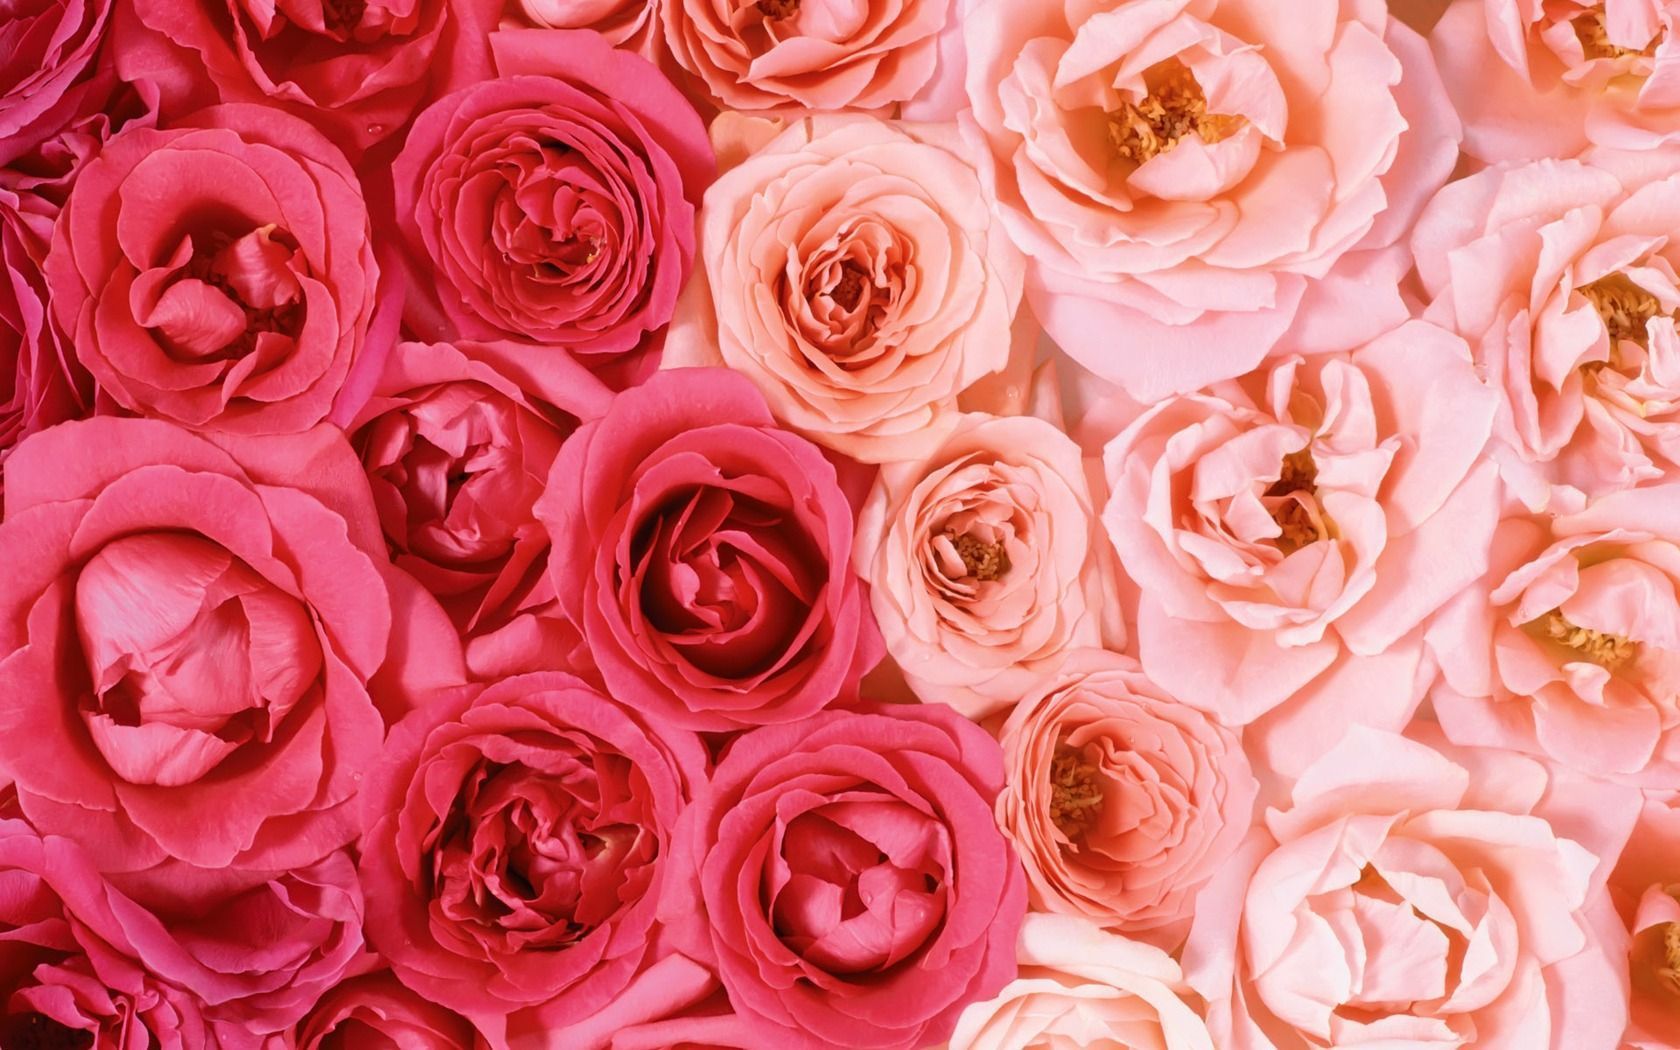 Red Rose Aesthetic Computer Wallpapers